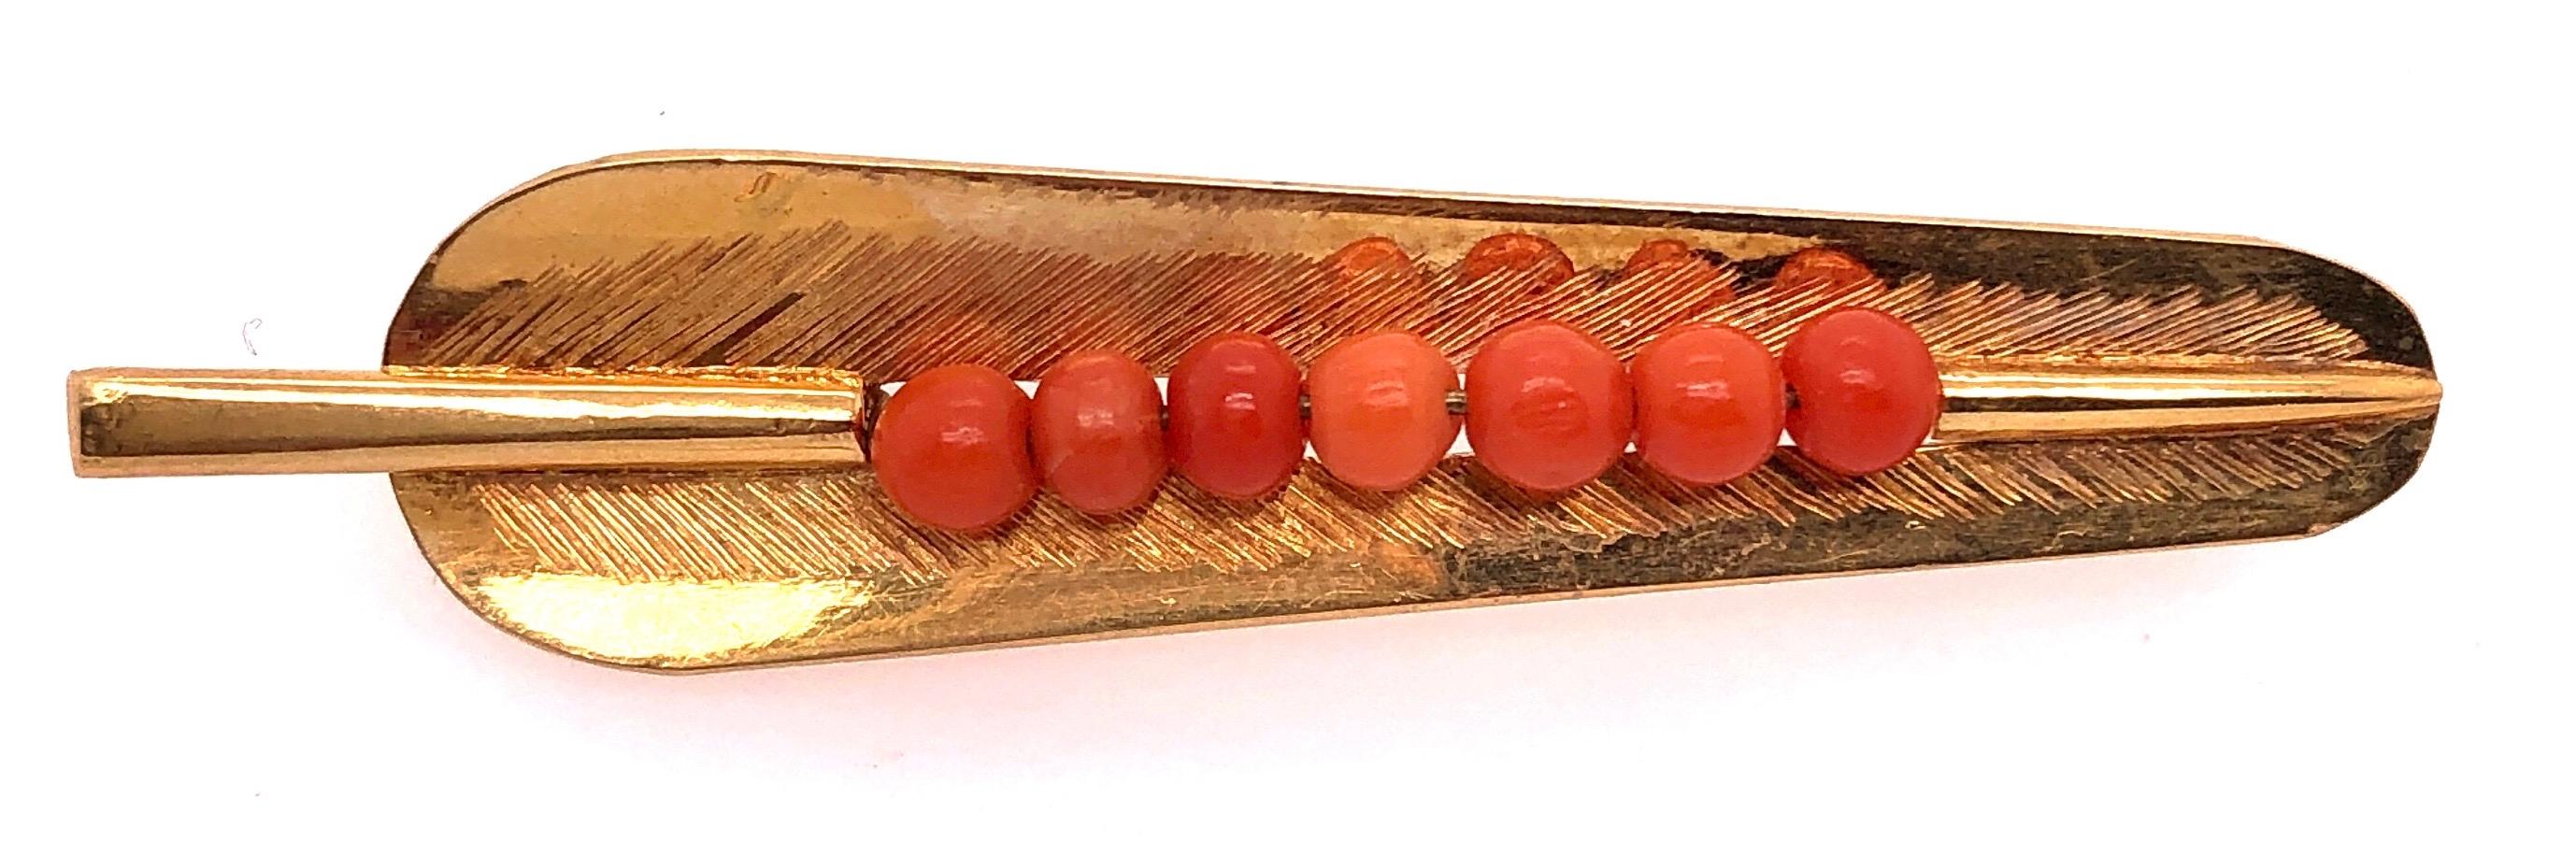 18 Karat Yellow Gold Leaf Brooch with Seven Round Coral
5.50 grams total weight.
58mm long by 13mm at the widest part. 